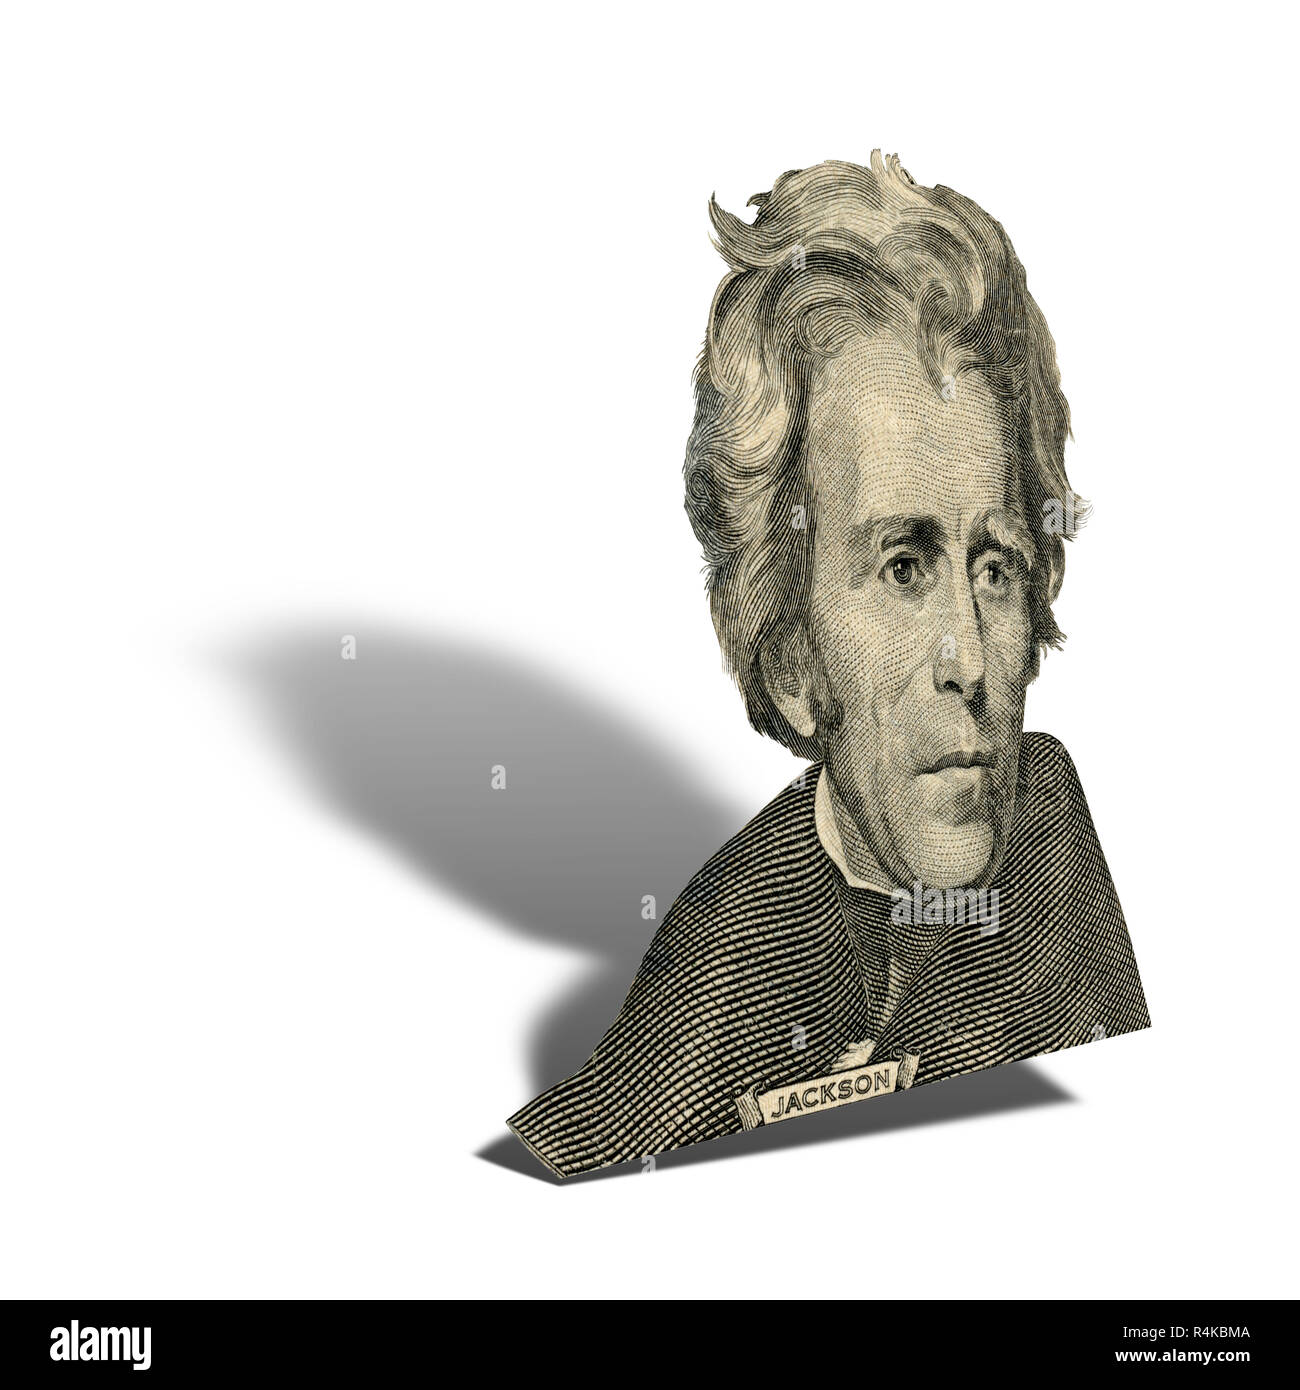 Portrait of former U.S. president Andrew Jackson as he looks on twenty dollar bill obverse.  Photo at an angle of 45 degrees, with a shadow. Stock Photo